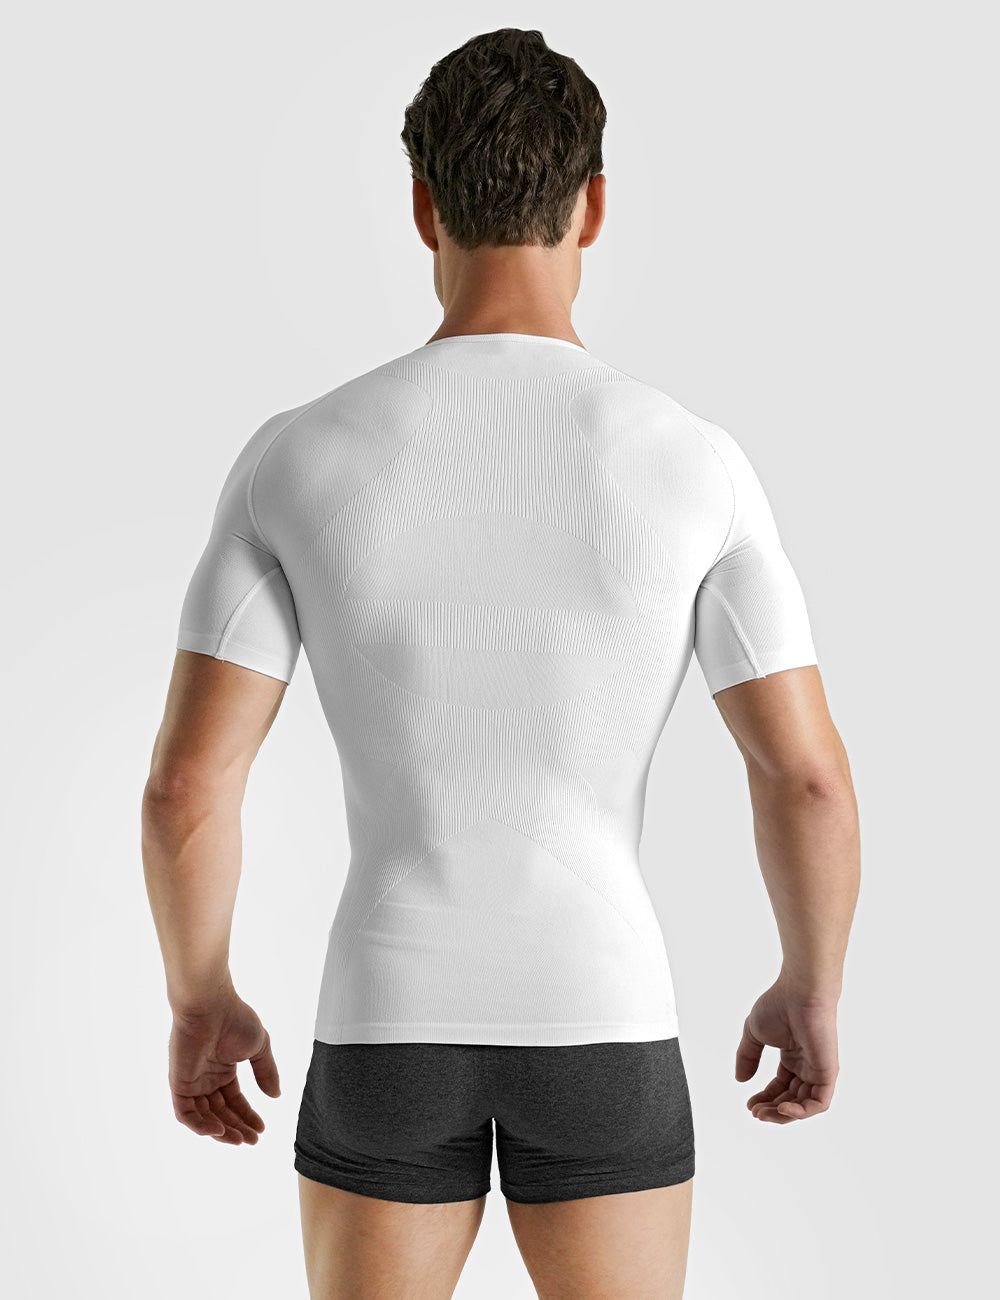 Men's Under Armour Compression Shirts Work From Home at International Jock